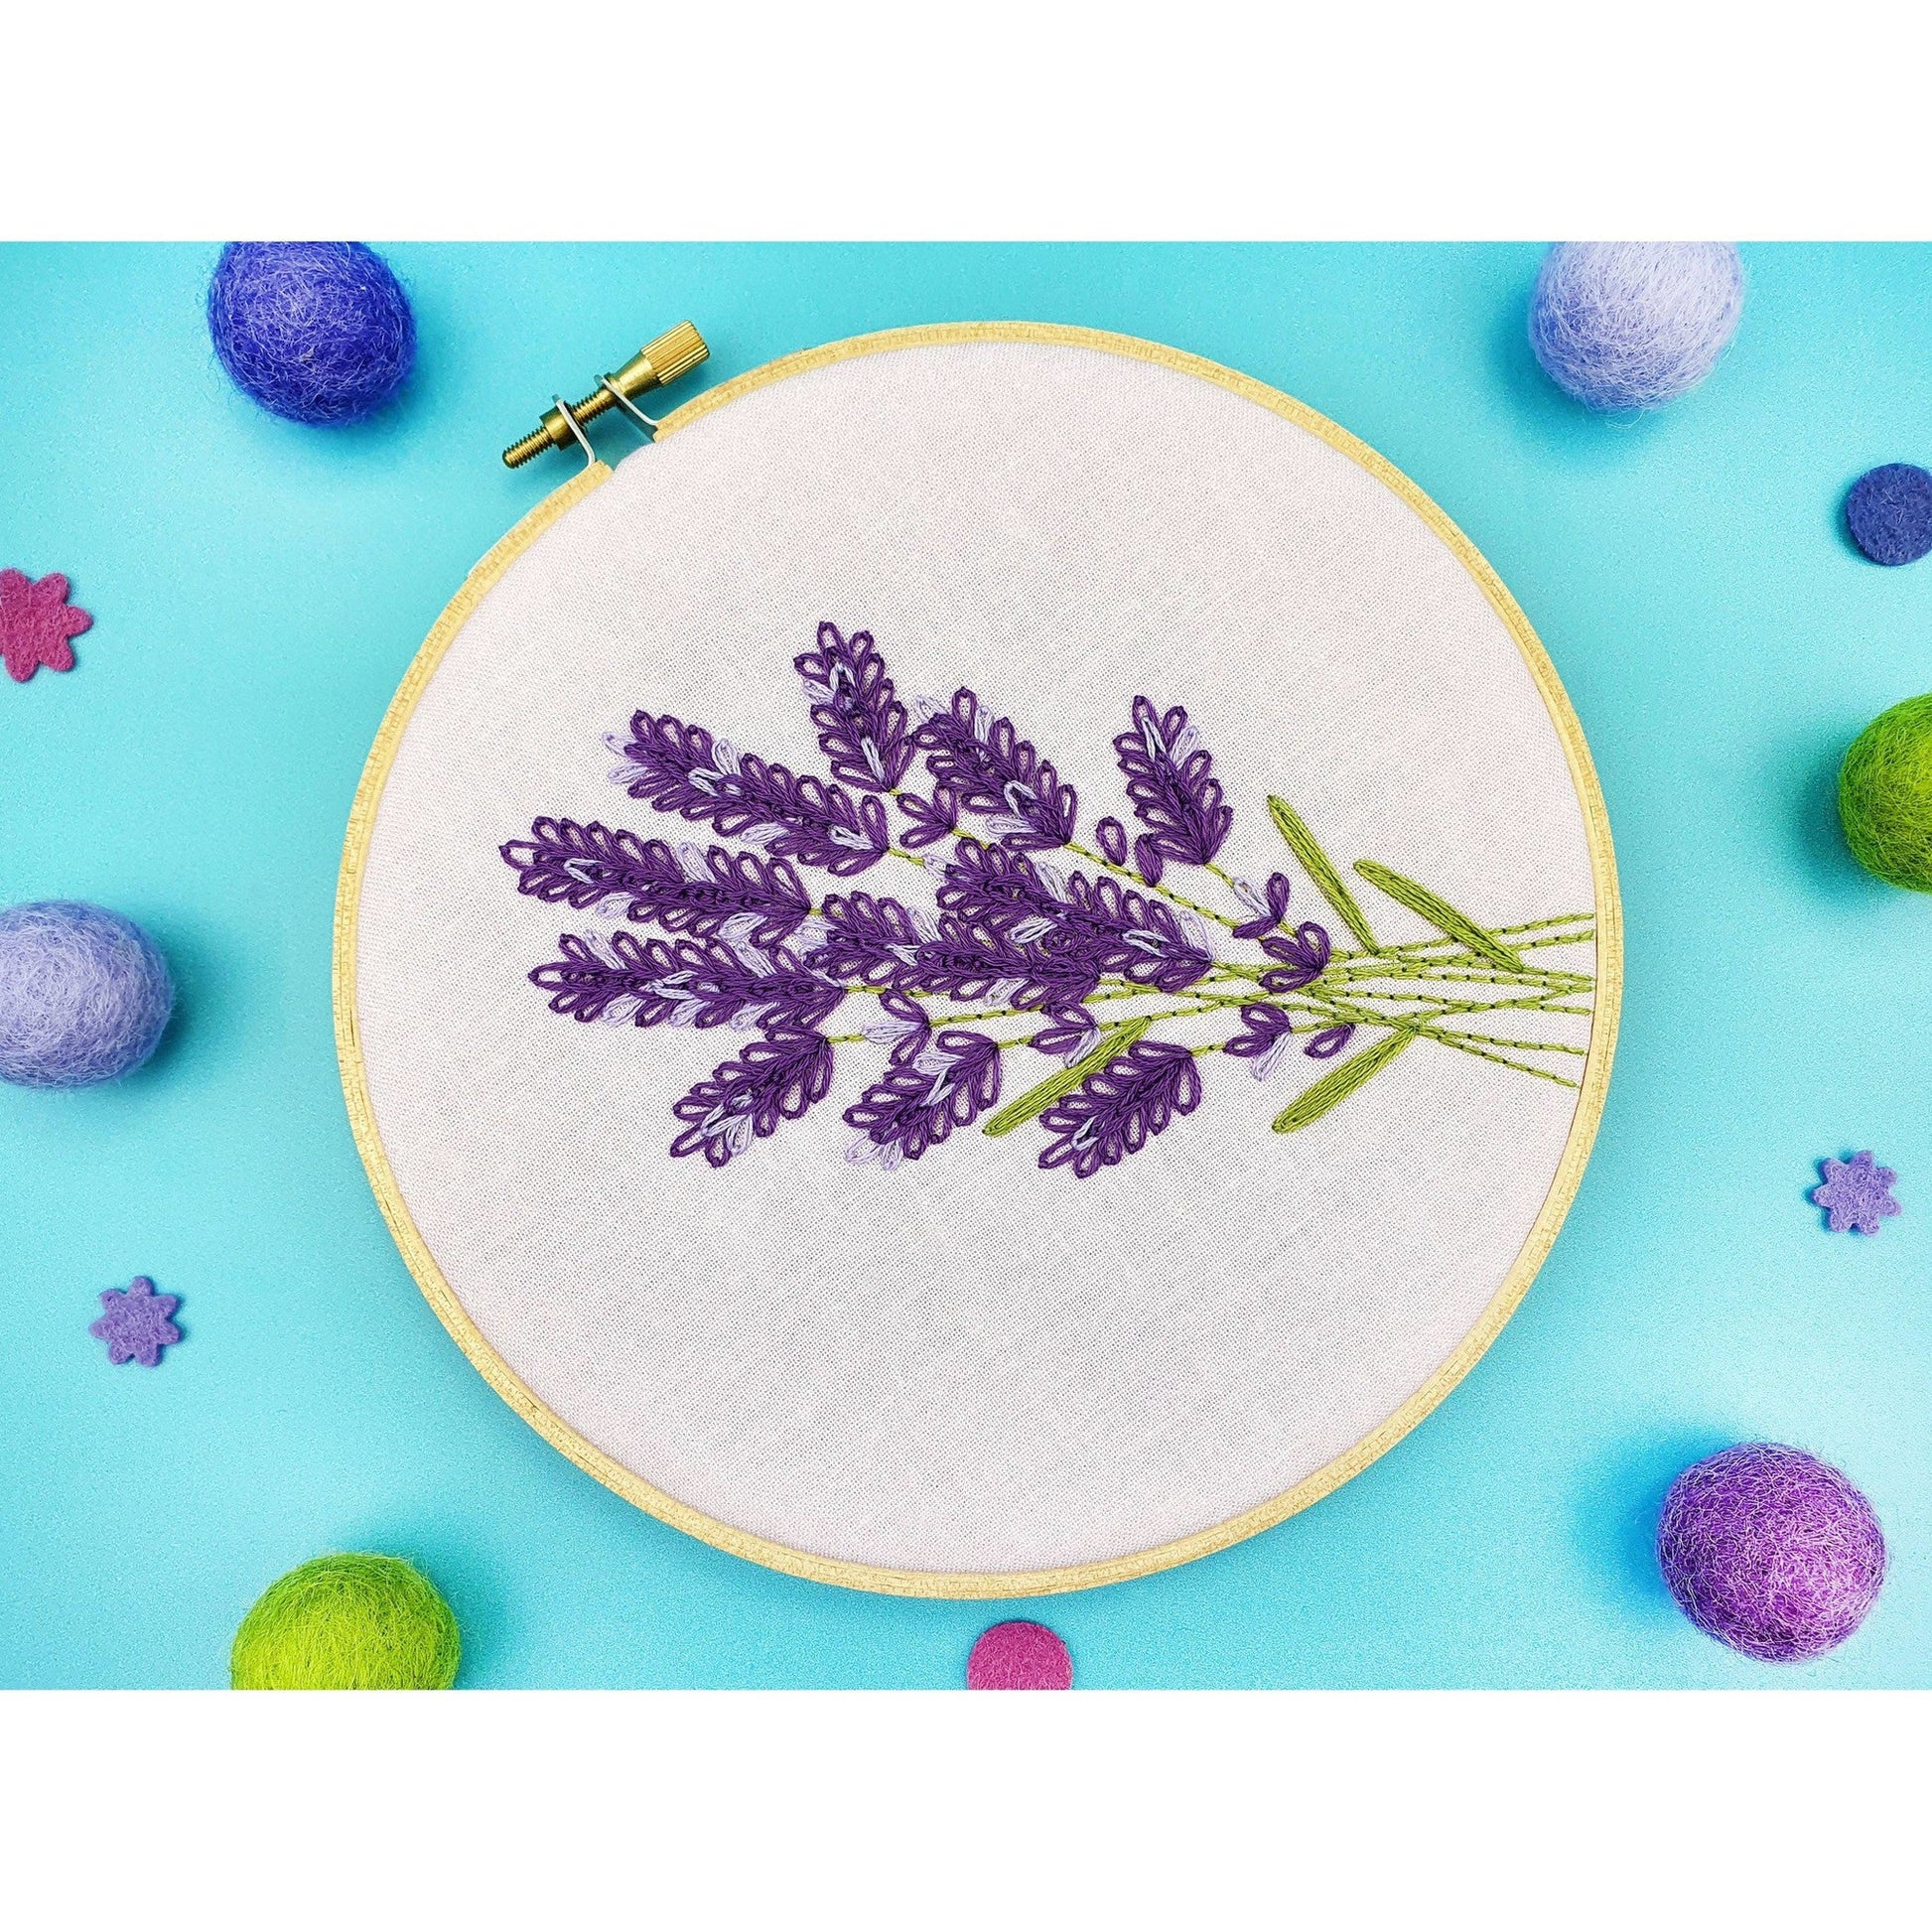 3 inch embroidery hoop｜TikTok Search